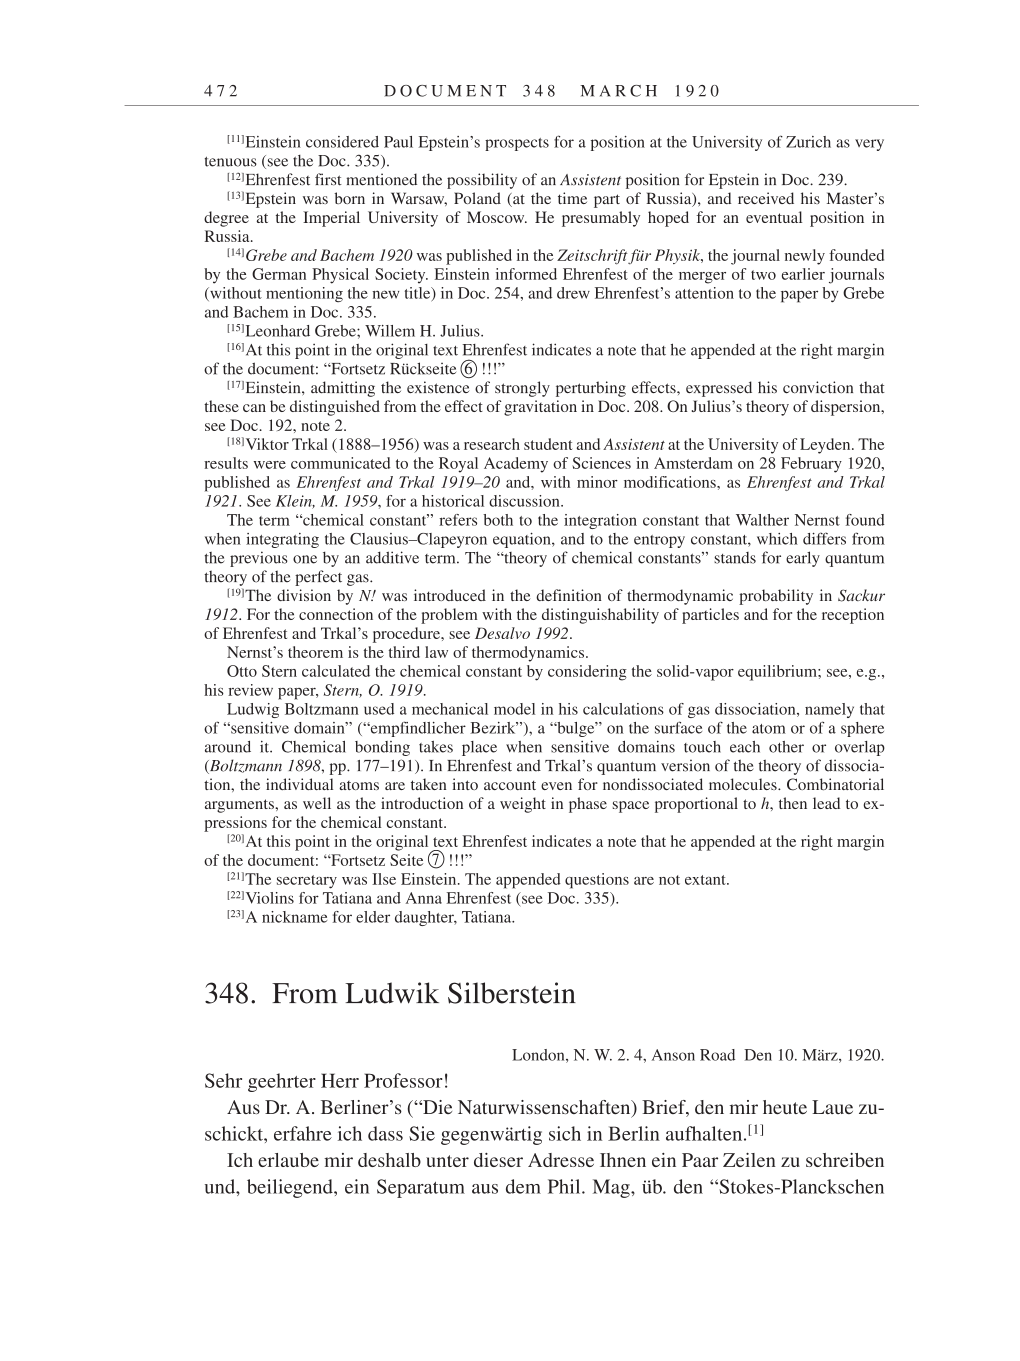 Volume 9: The Berlin Years: Correspondence January 1919-April 1920 page 472